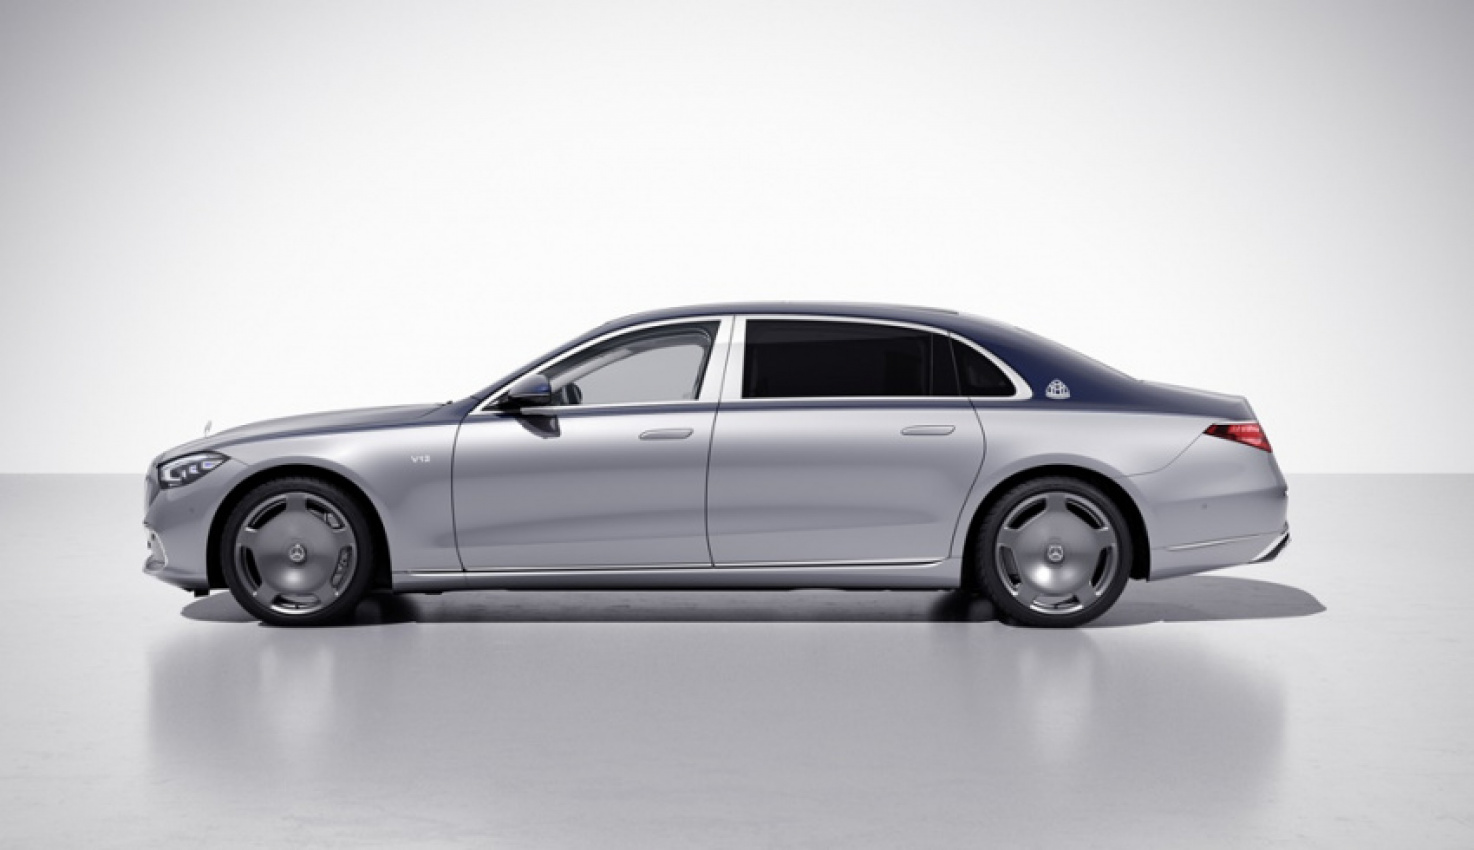 autos, cars, maybach, mercedes-benz, edition 100, limited edition, maybach w3, mercedes, mercedes-maybach, mercedes-maybach gls 600 4matic, mercedes-maybach s-class, special edition, mercedes-maybach creates limited edition to celebrate 100th anniversary of maybach w3